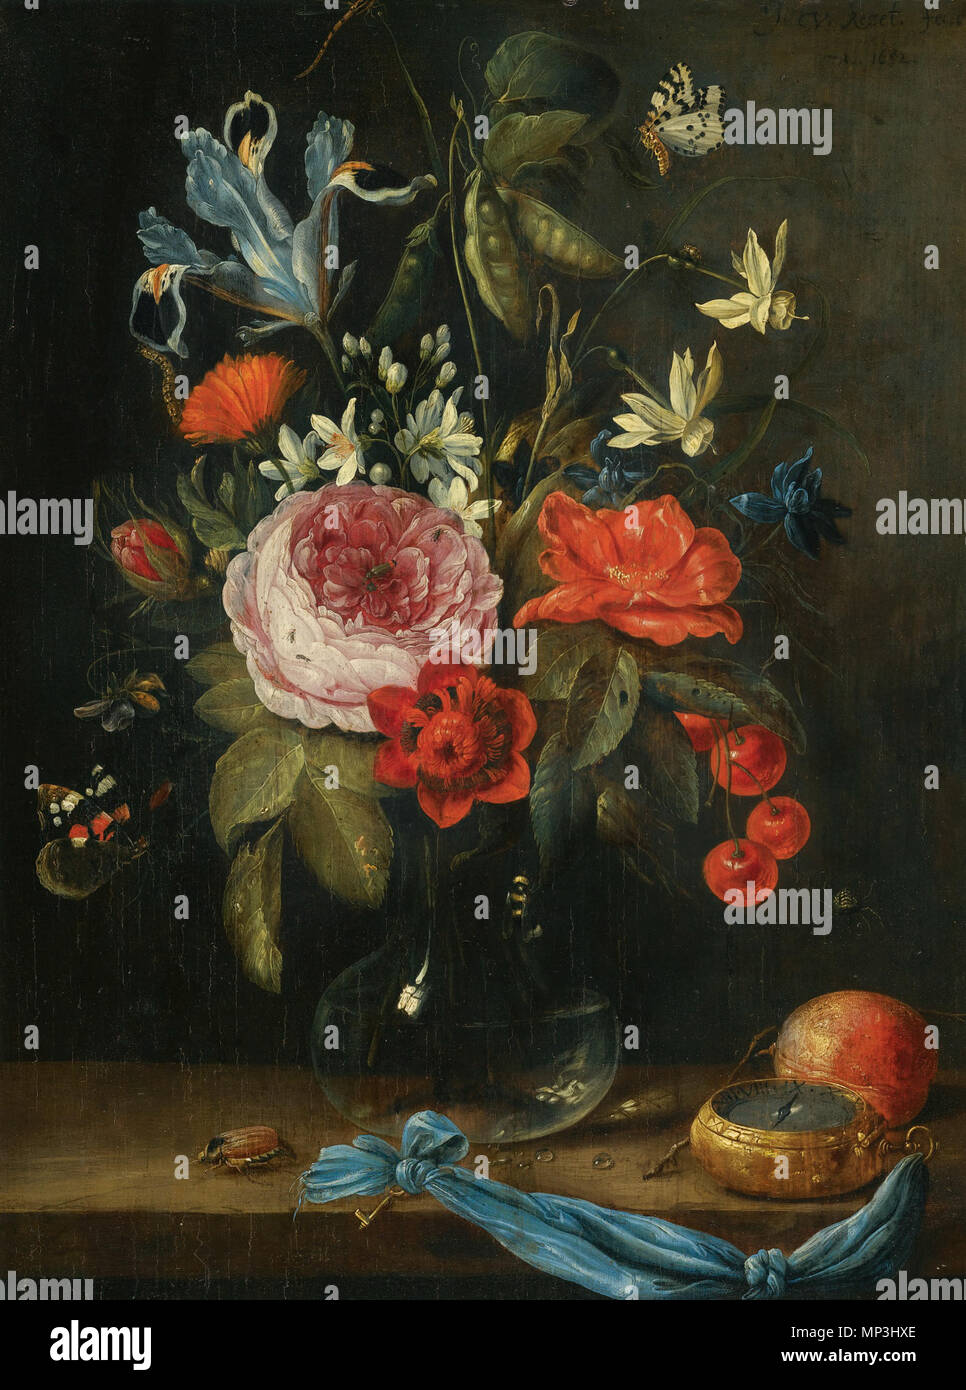 Still life with flowers in a glass vase, with a red admiral butterfly, a bee and other insects, and a pocket watch, a peach and a beetle on the bottom edge  1652.   704 Jan van Kessel de Oude - Stilleven met bloemen in een glazen vaas, samen met een atalanta vlinder etc Stock Photo